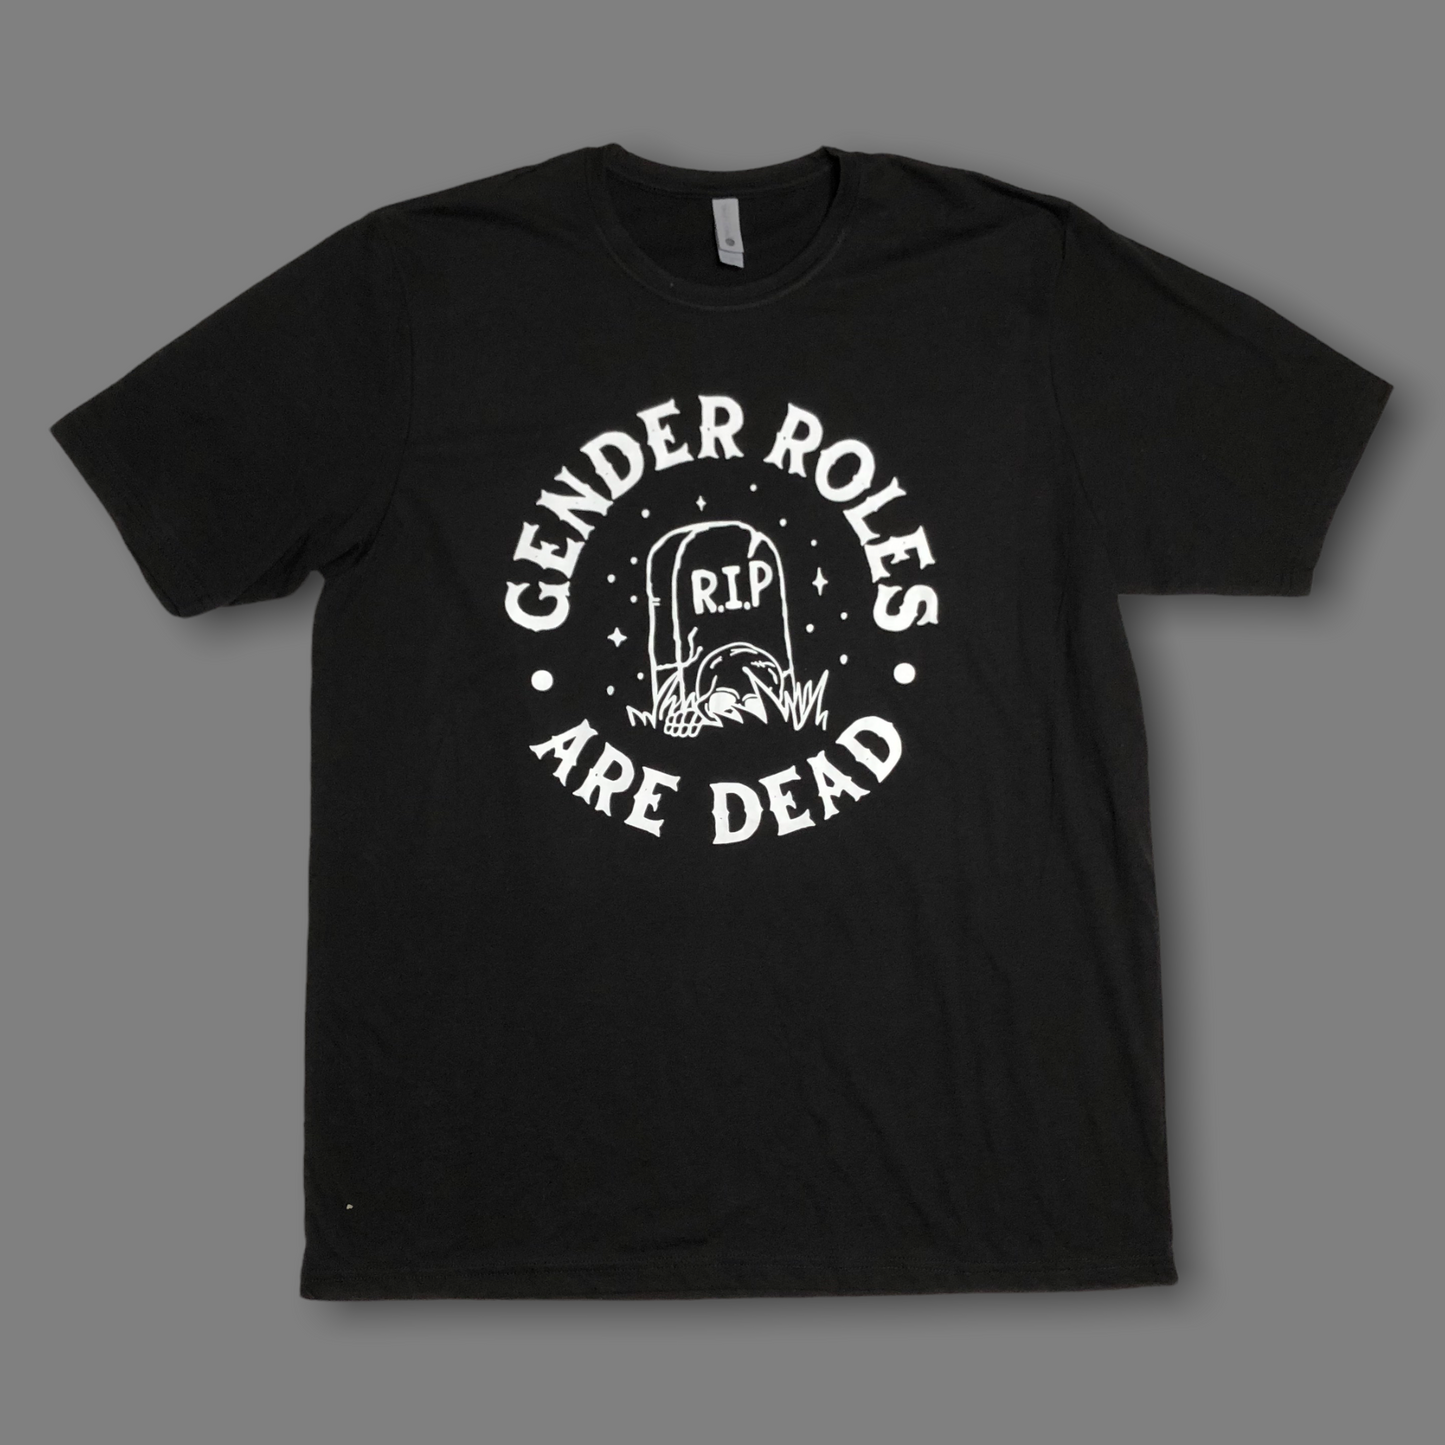 “Gender Roles Are Dead” Shirt